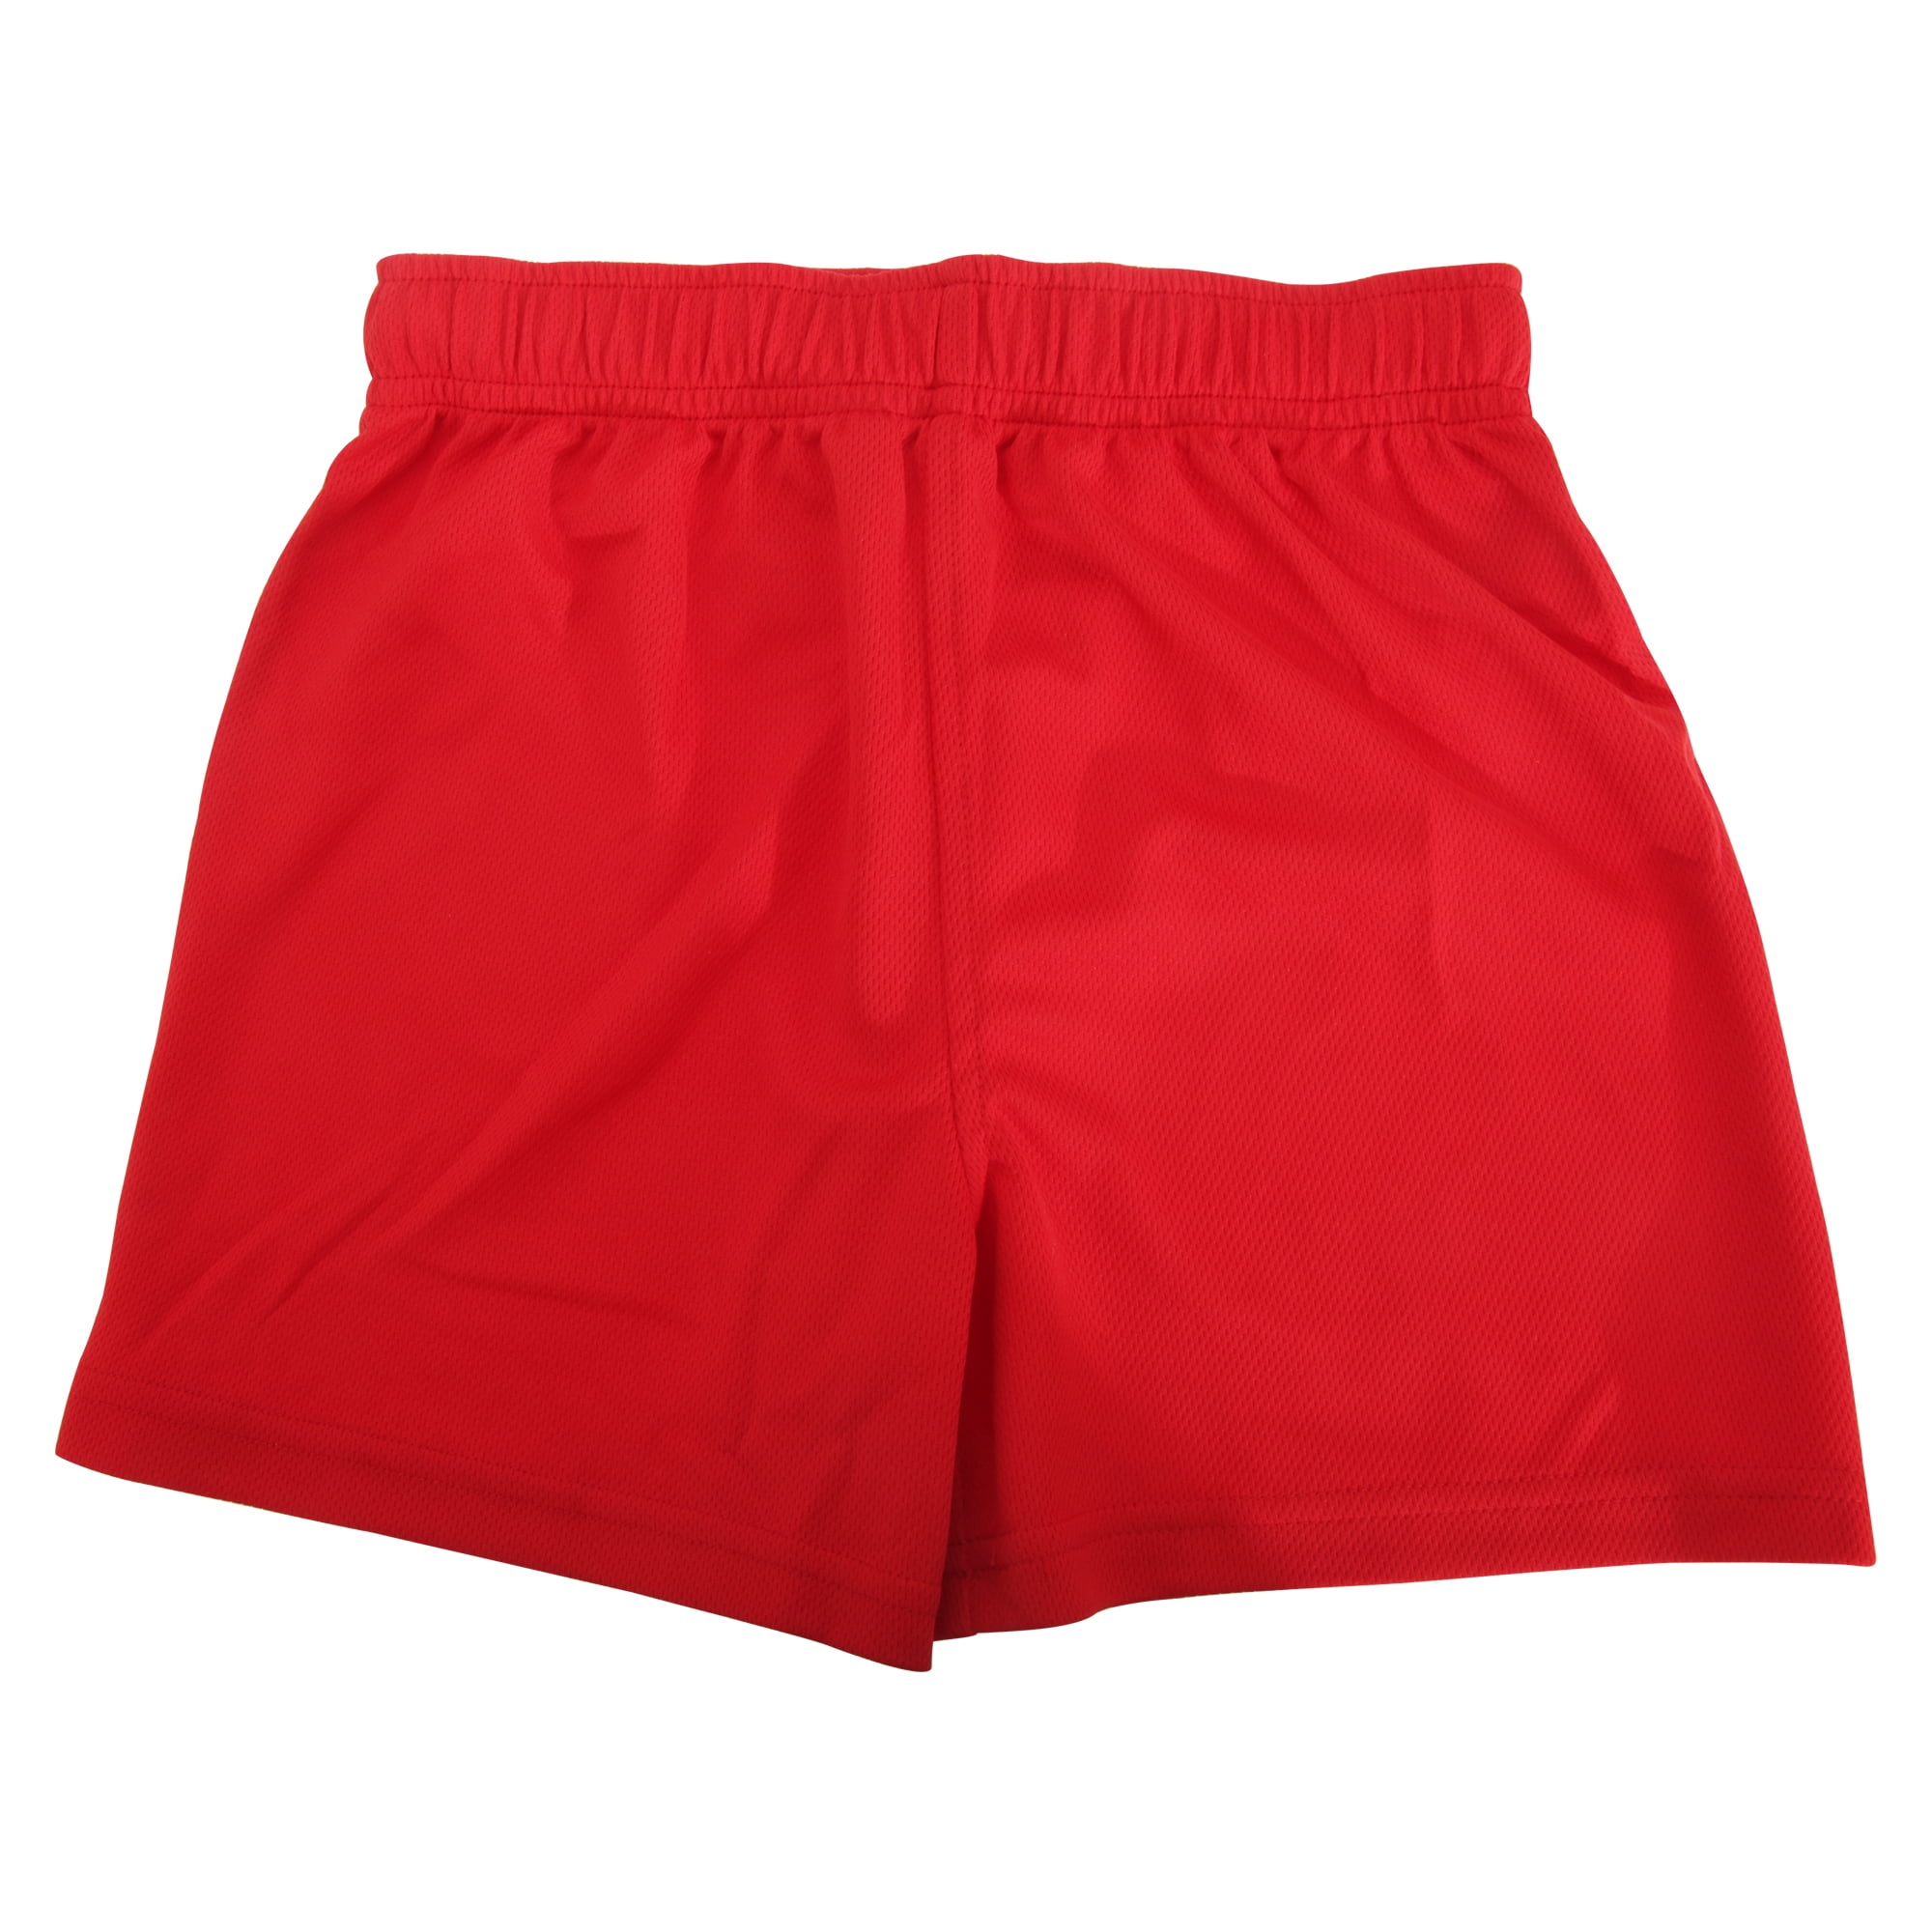 Fruit of the Loom Childrens/Kids Moisture Wicking Performance Shorts 